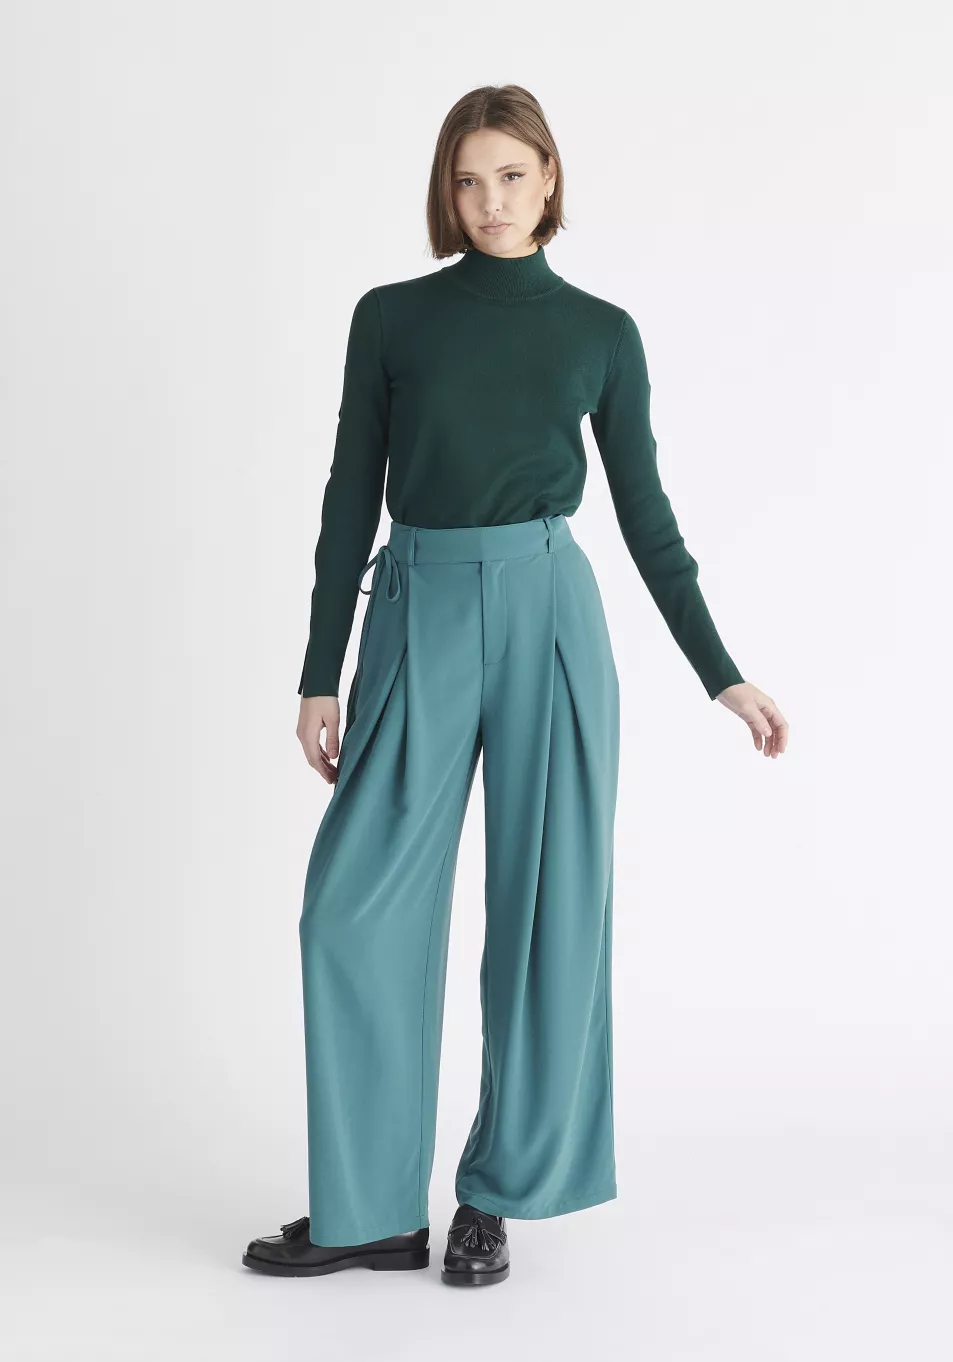 Paisie Teal Pleated High Waist Trousers; Dark Green Knitted Cut Out Sleeve Top